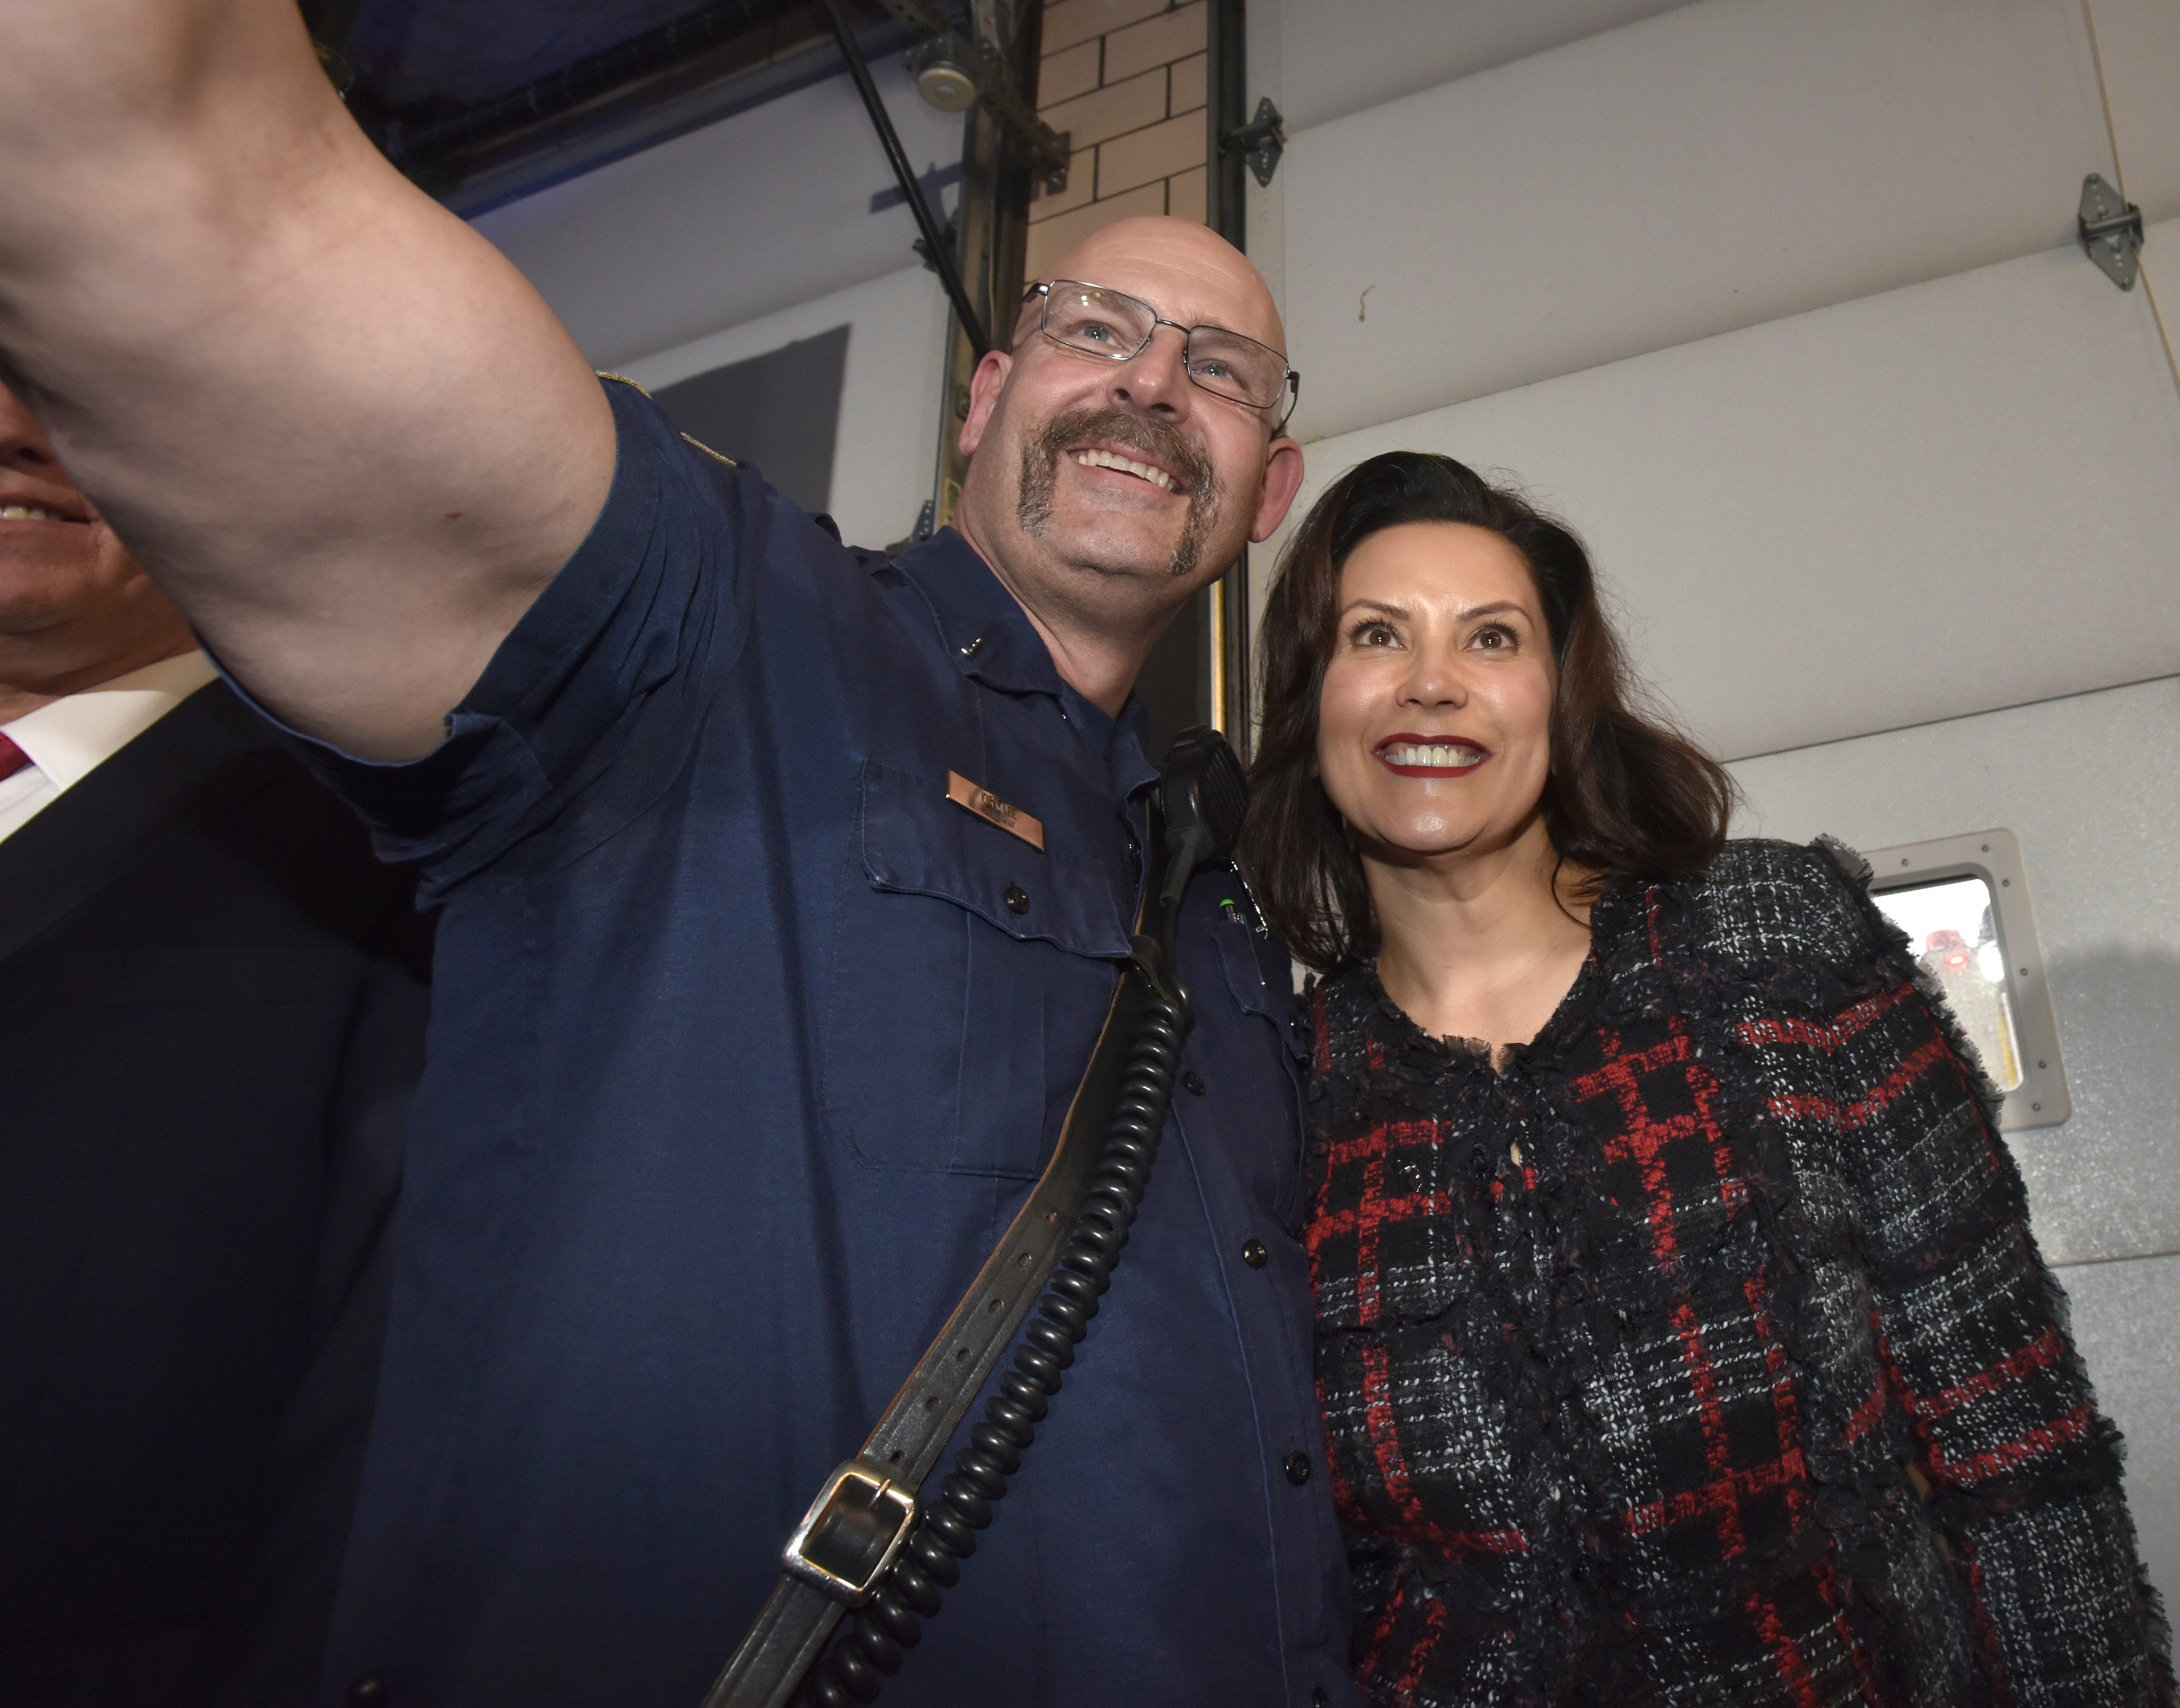 Eastpointe Fire Lt. Kirk Lee, left, takes a selfie with Michigan Governor Gretchen Whitmer after the press conference.